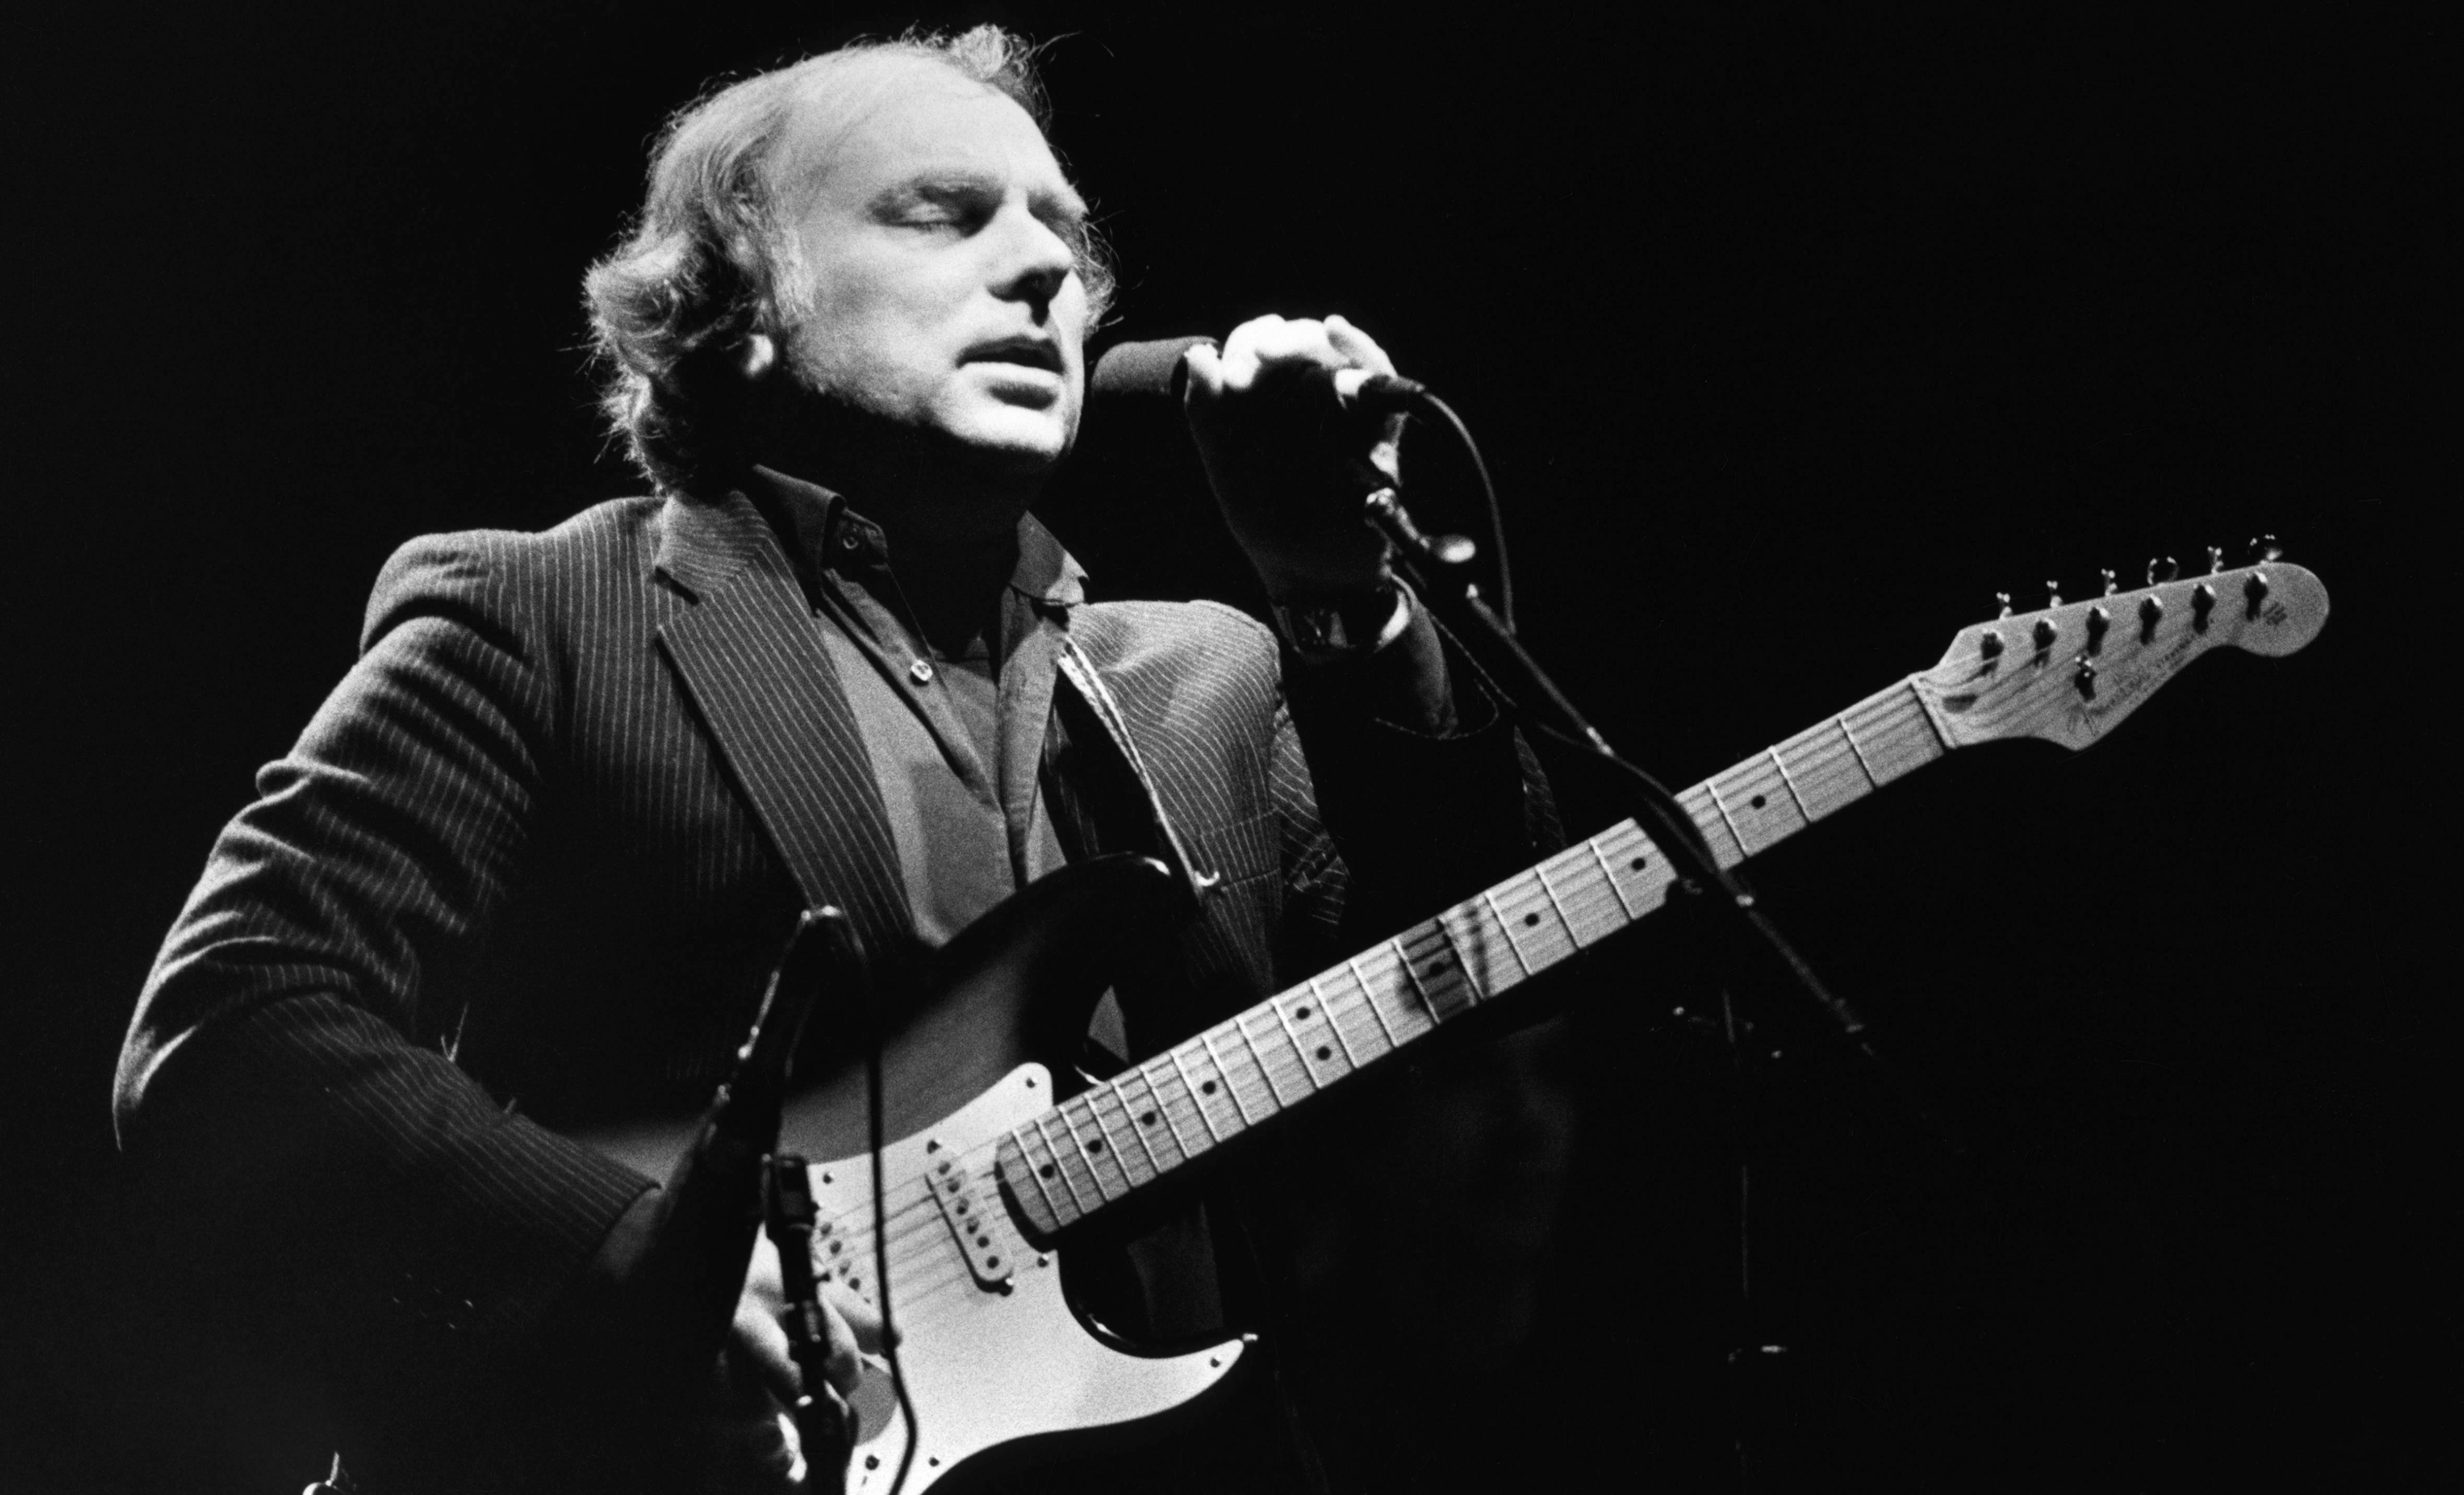 Have I Told You Lately Van Morrison 1989 Endless Love 20 Songs About Long Term